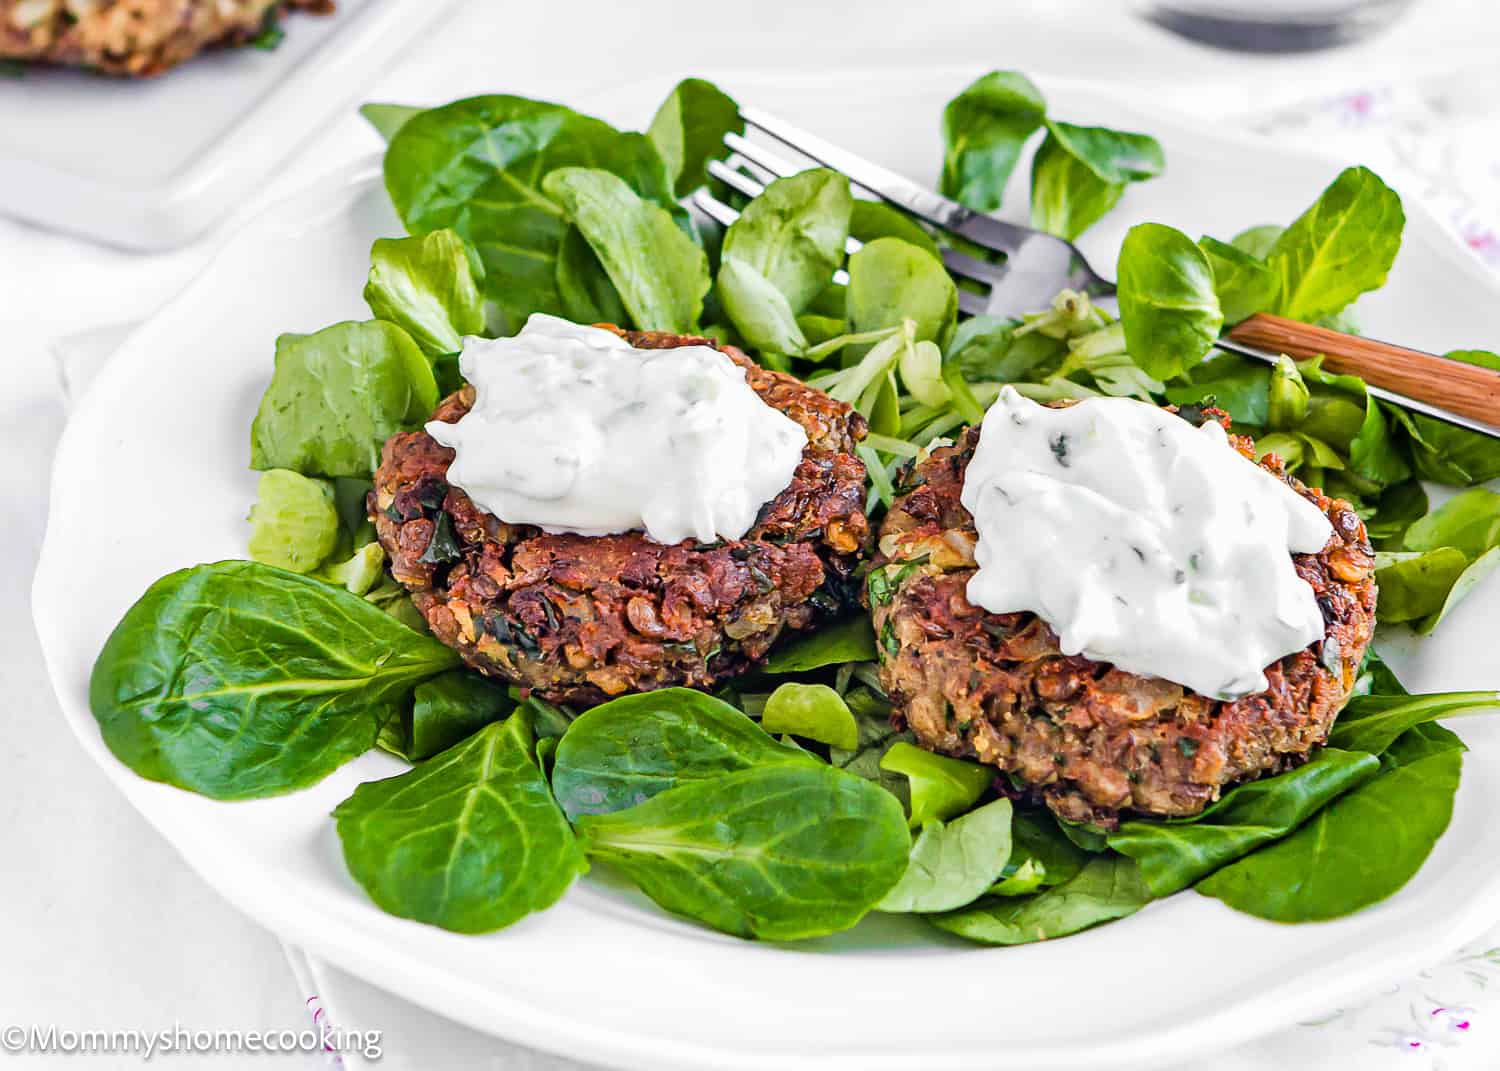 two Healthy Easy Lentil Patties with yogurt sauce on top over greens on a plate.